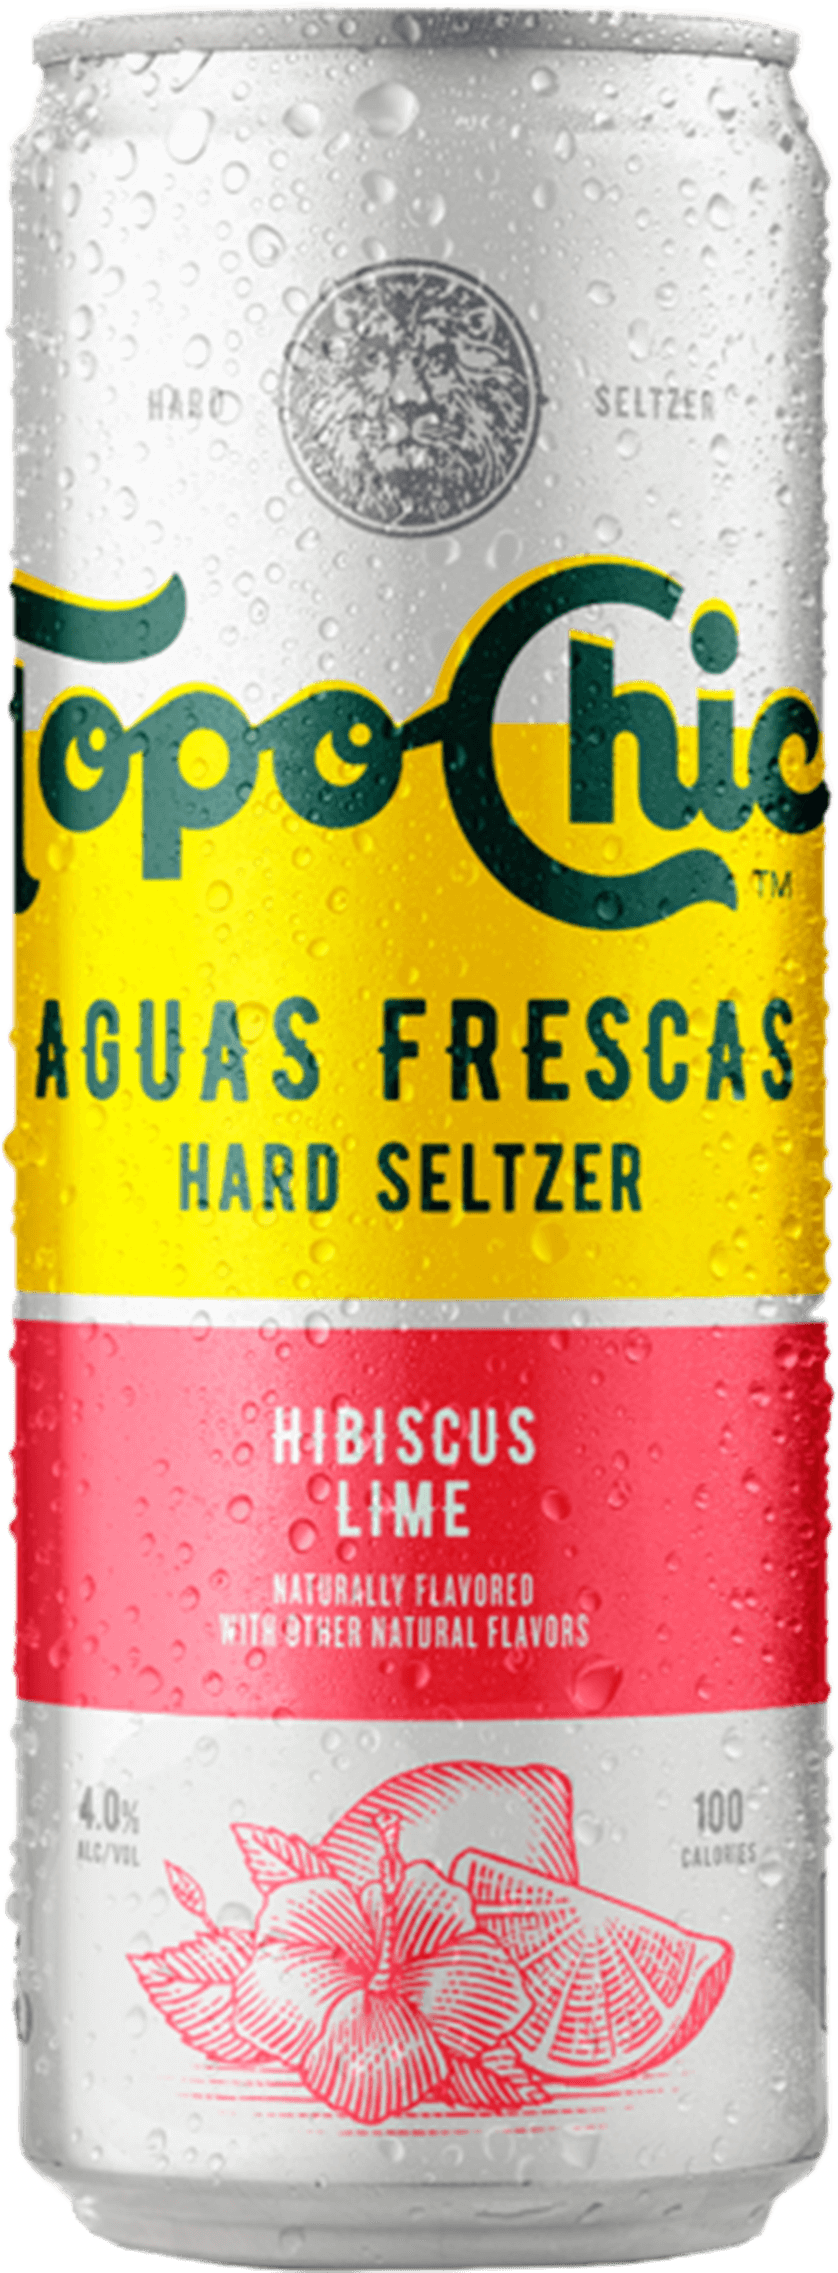 Hibiscus Lime can